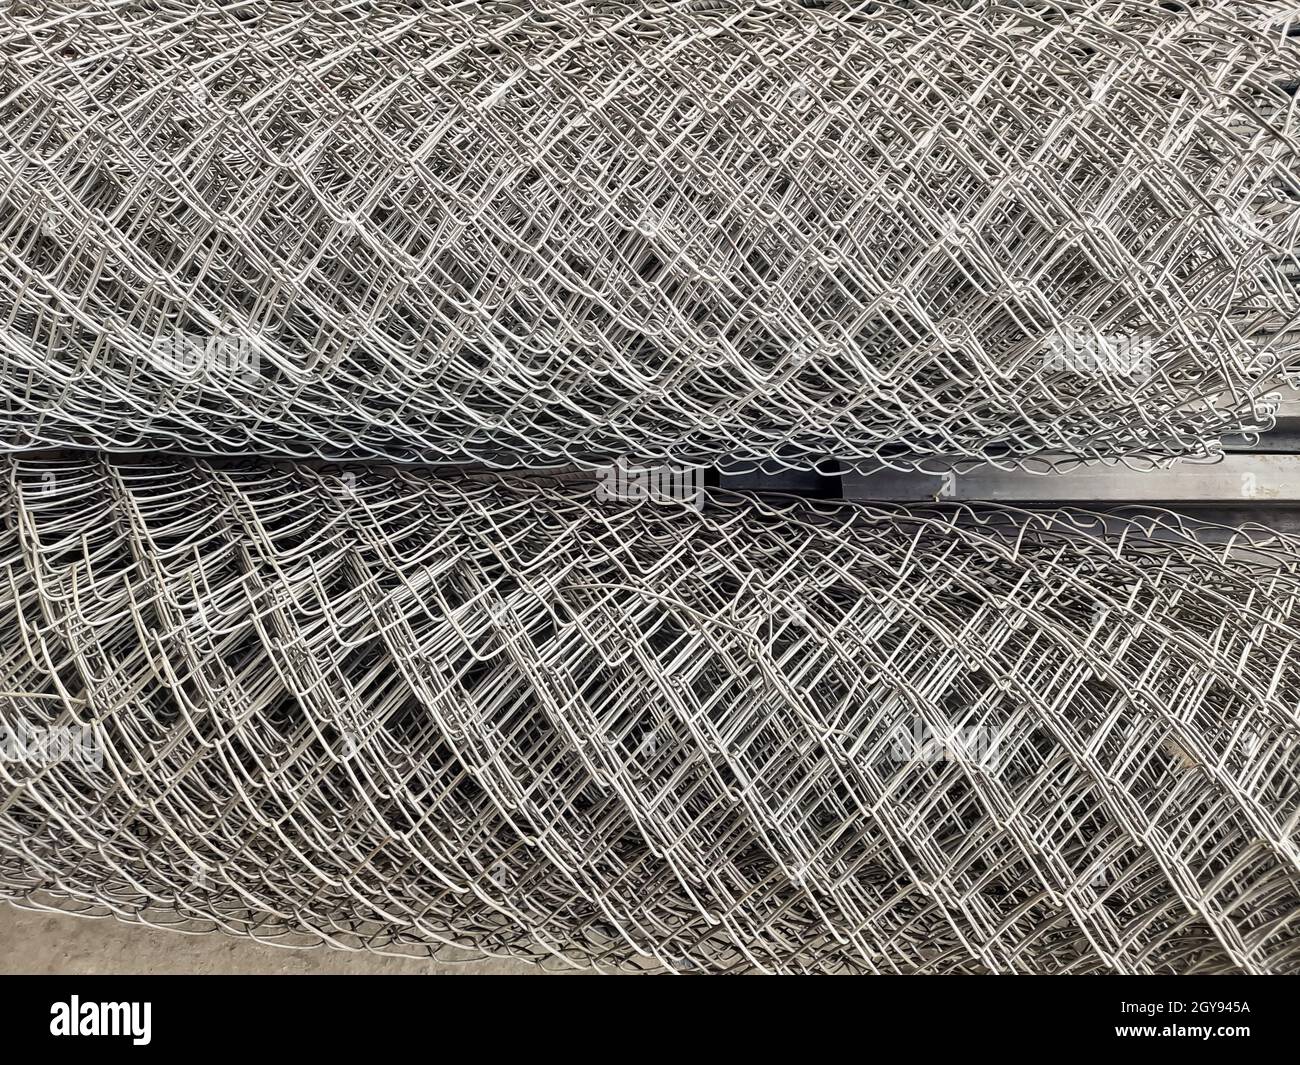 Metal bars background in diagonal lines close-up, industrial mesh of steel wire texture, building material Stock Photo